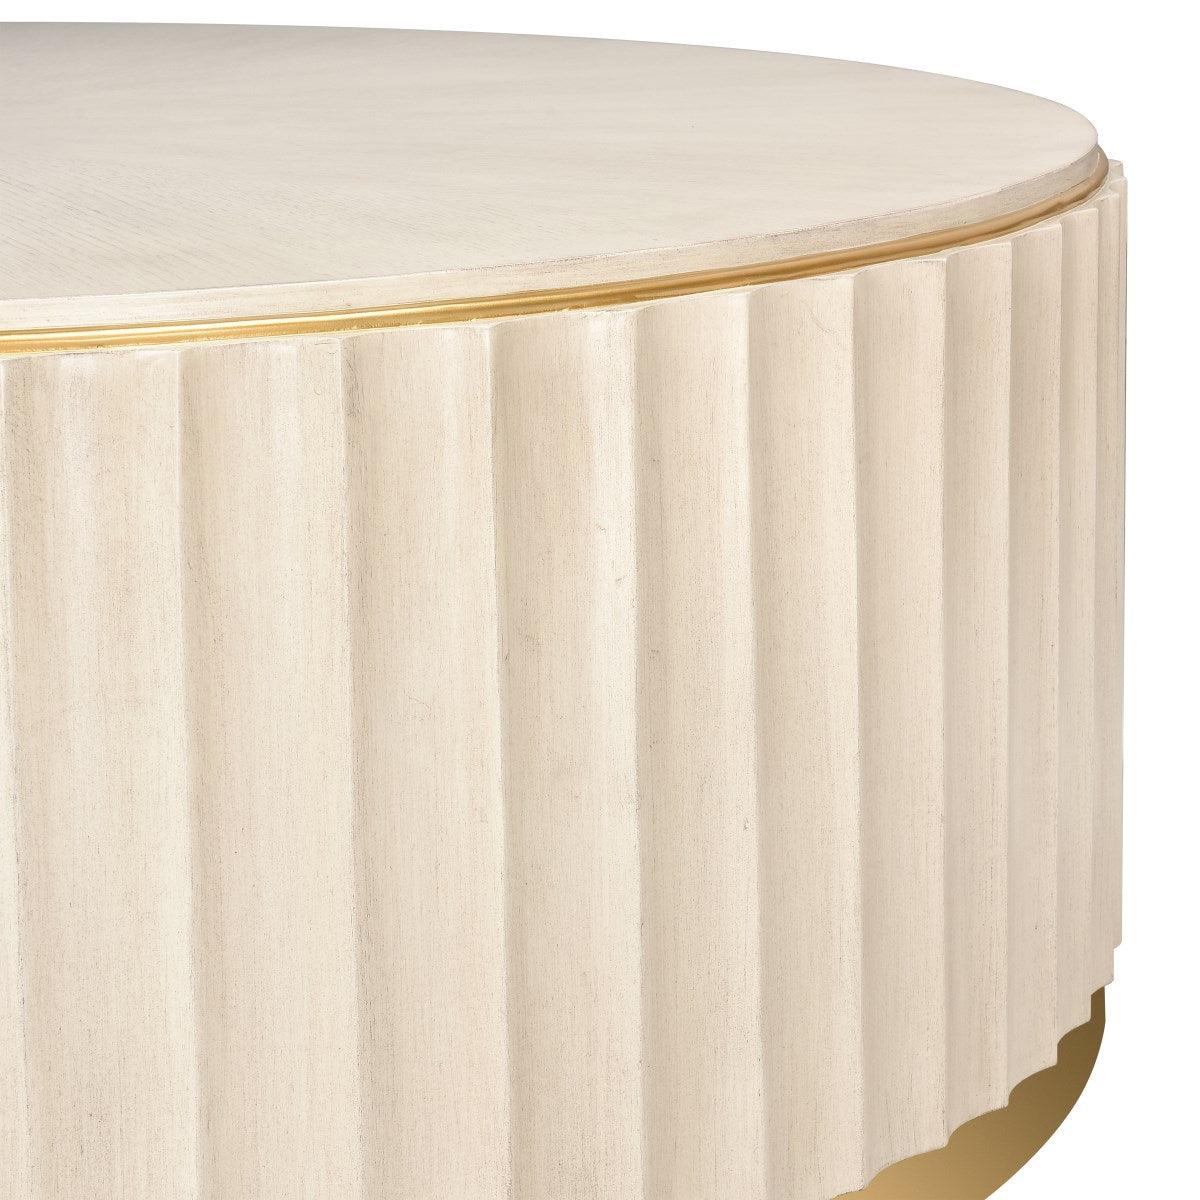 Fluted Round Brass Base Coffee Table - Belle Escape